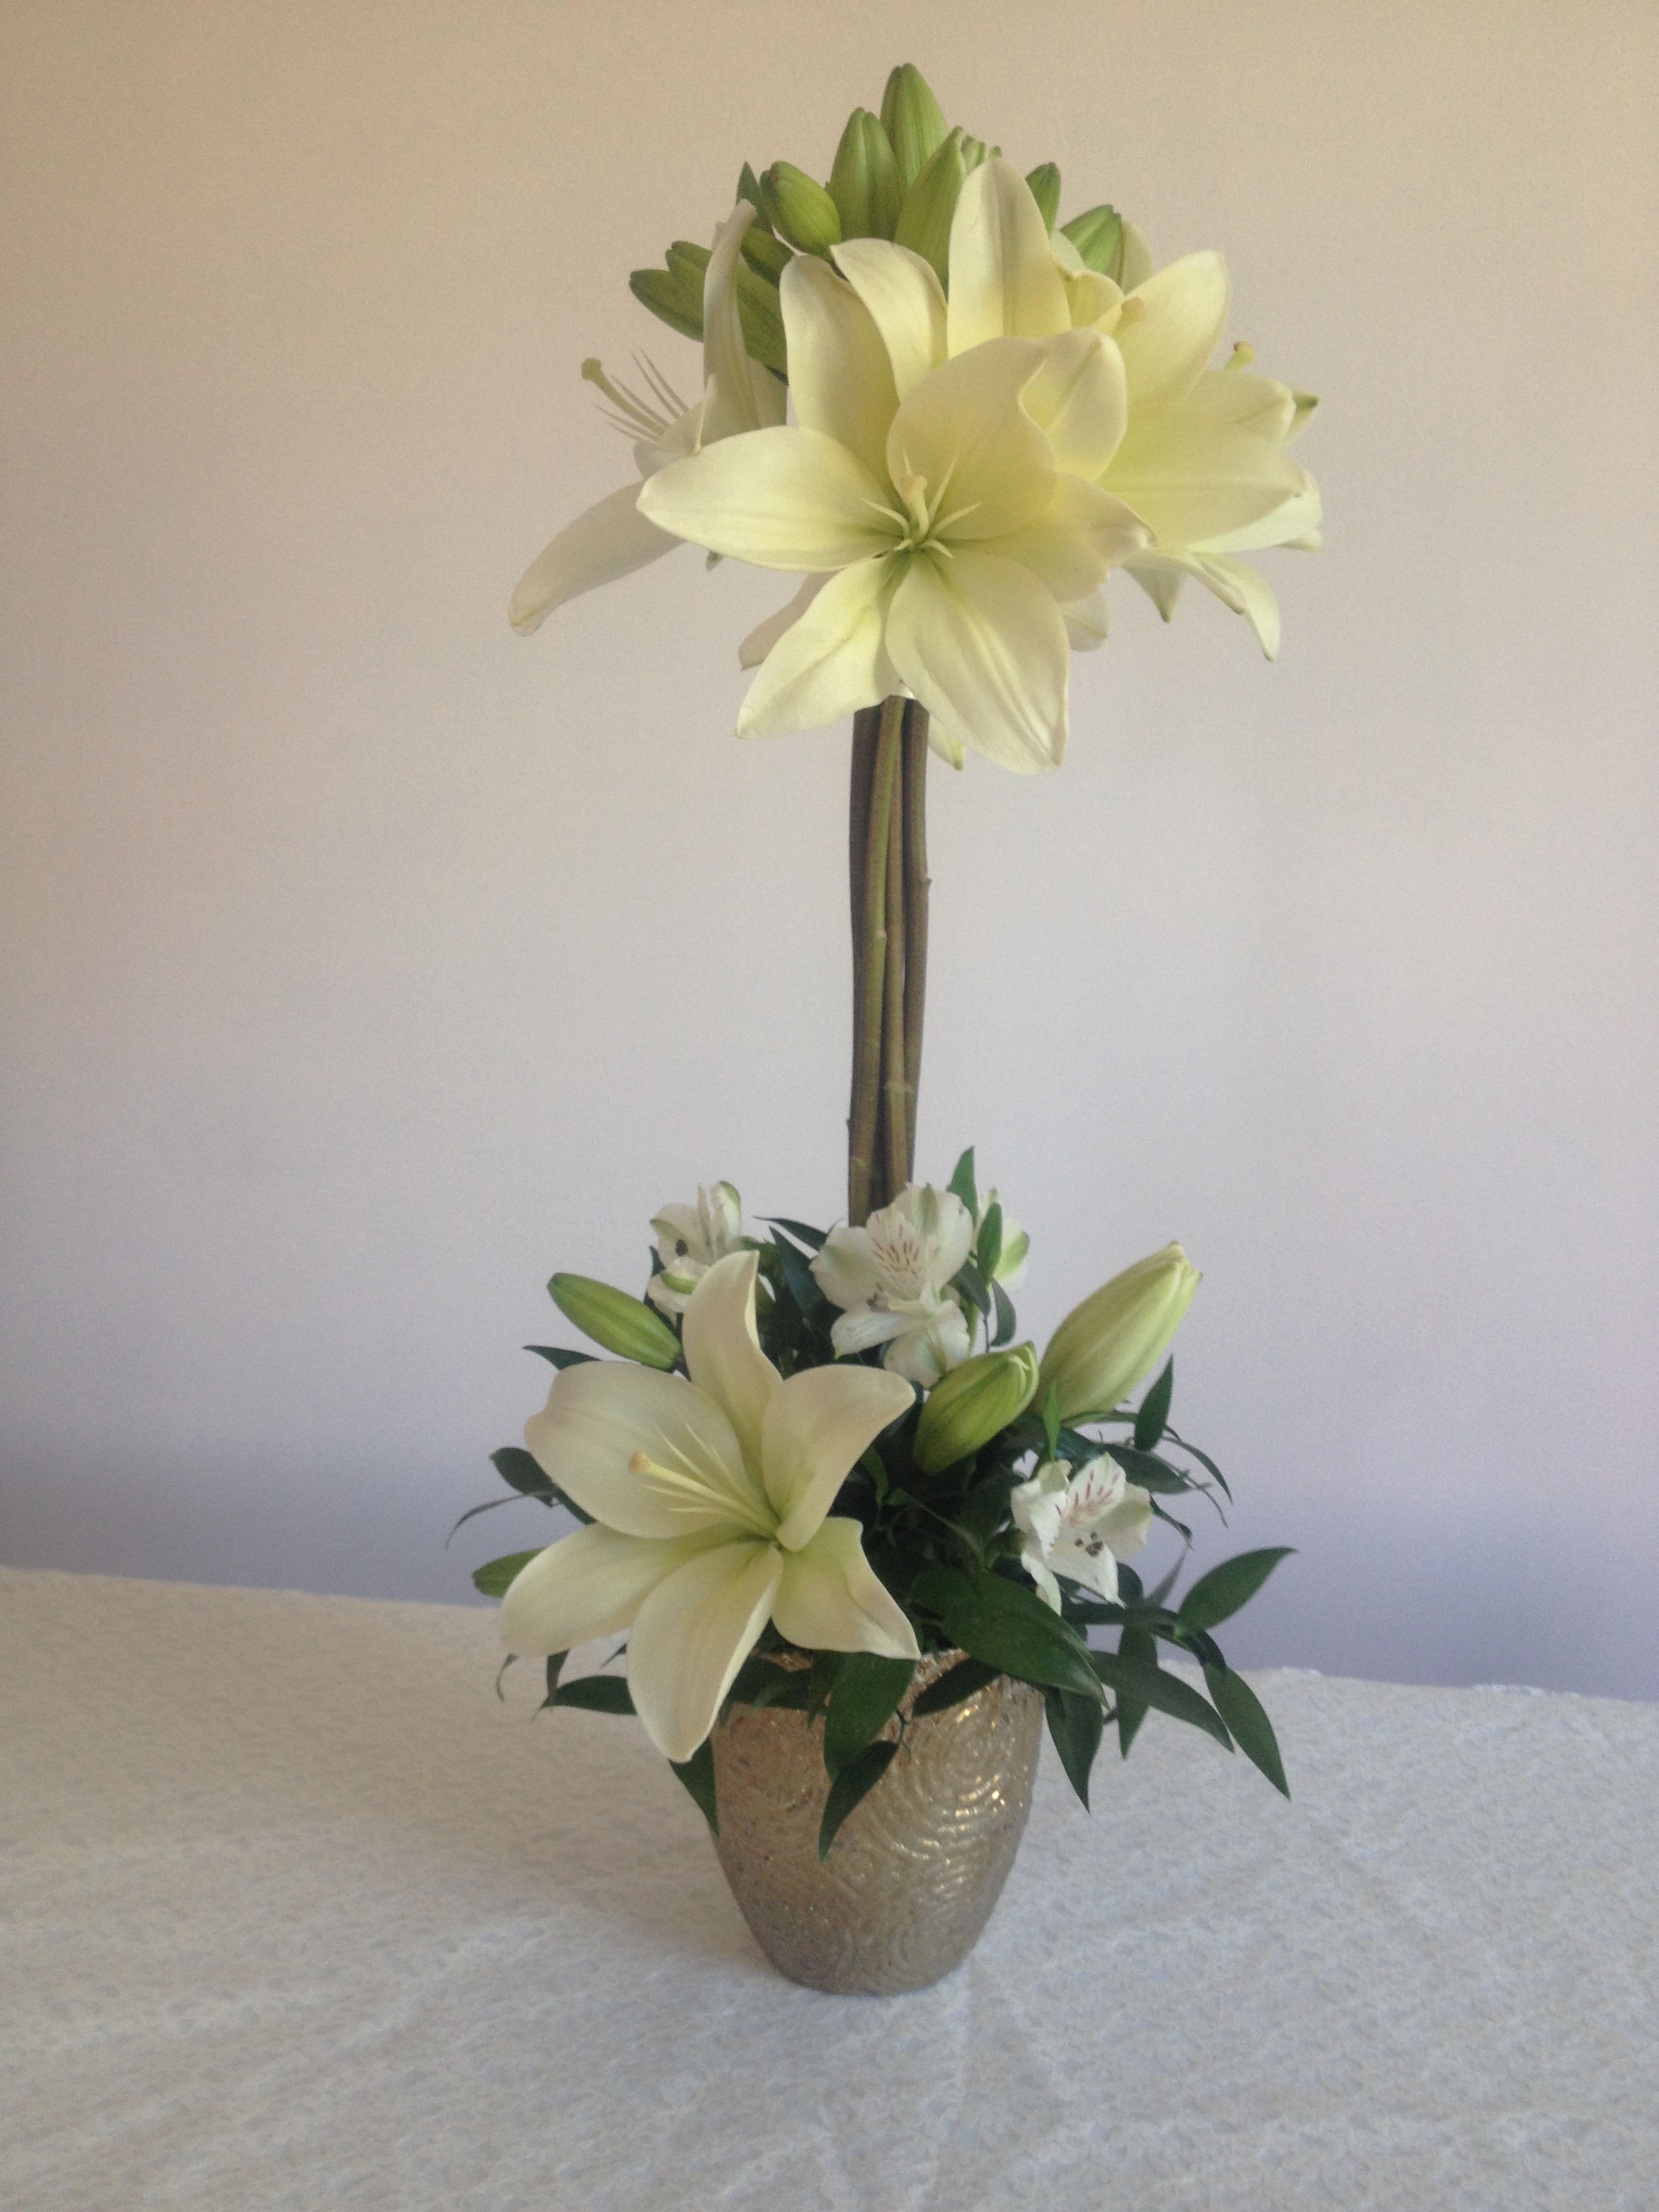 Evelisa Floral & Design: Lily Topiary